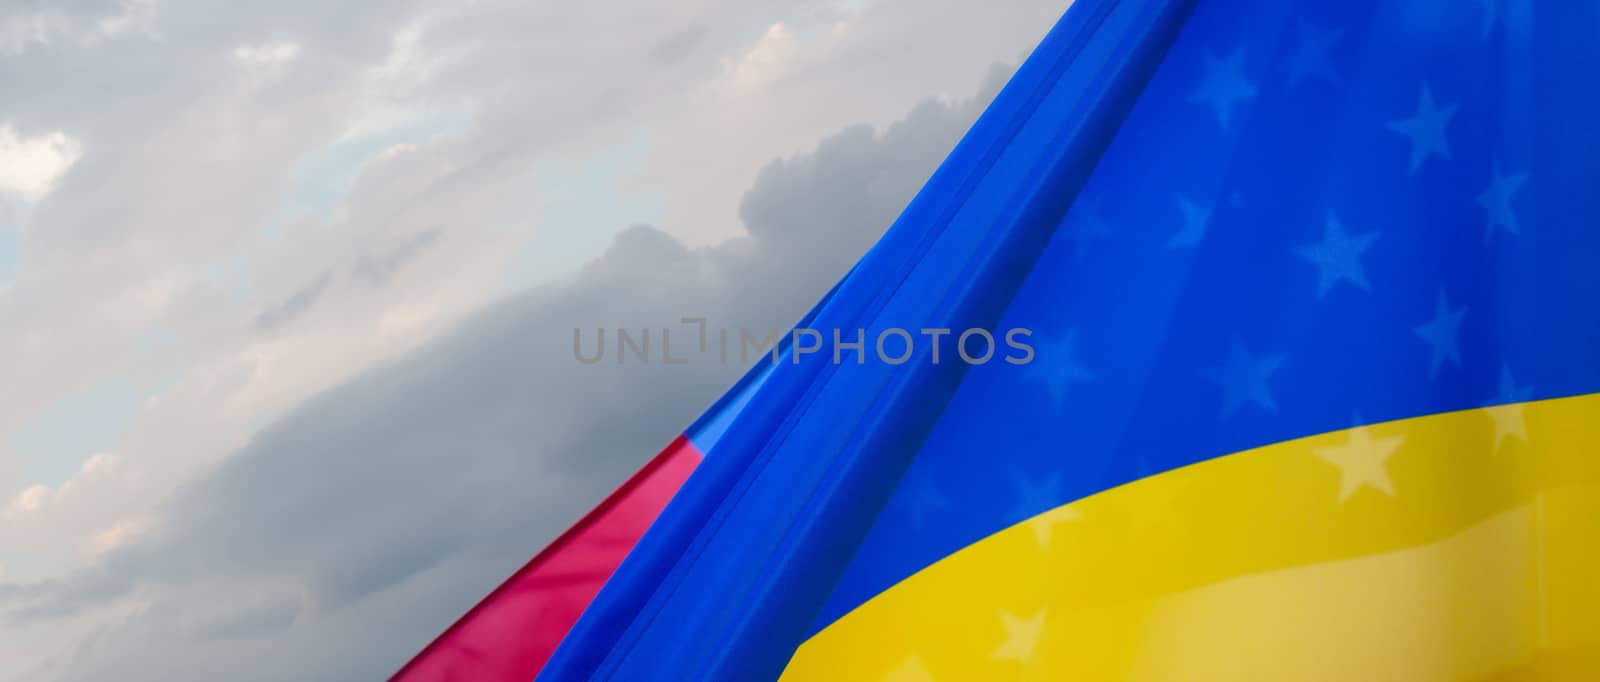 Ukrainian and American flags shine through each other